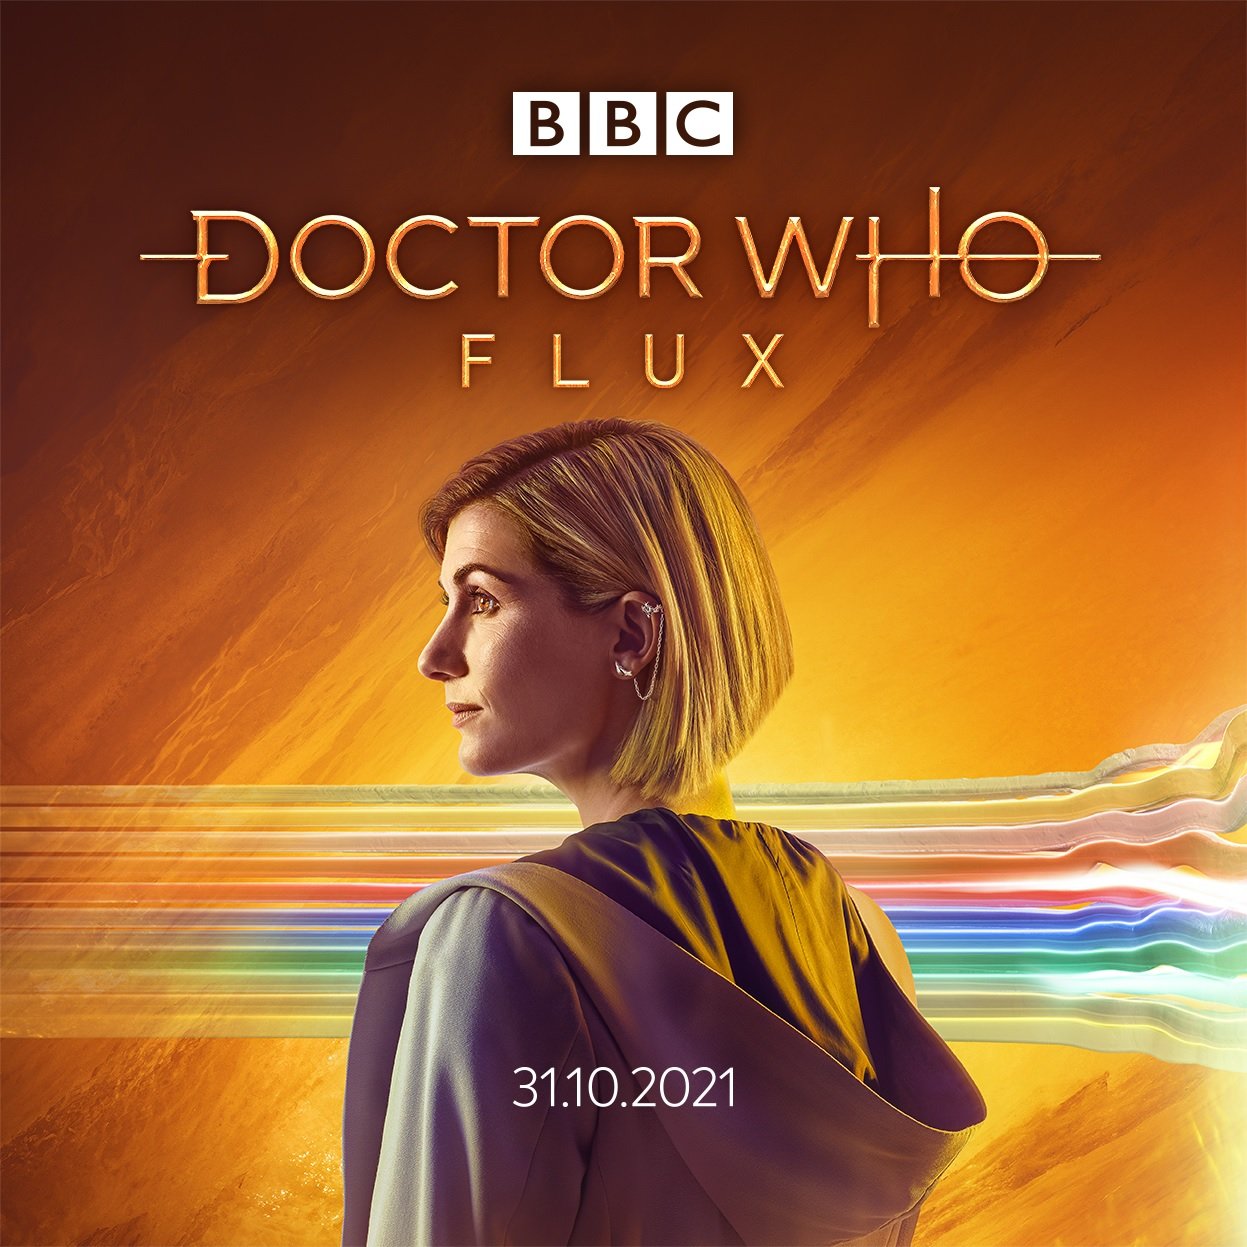 Viewing Figures: An Overview of the Doctor Who Series 13 Flux Ratings